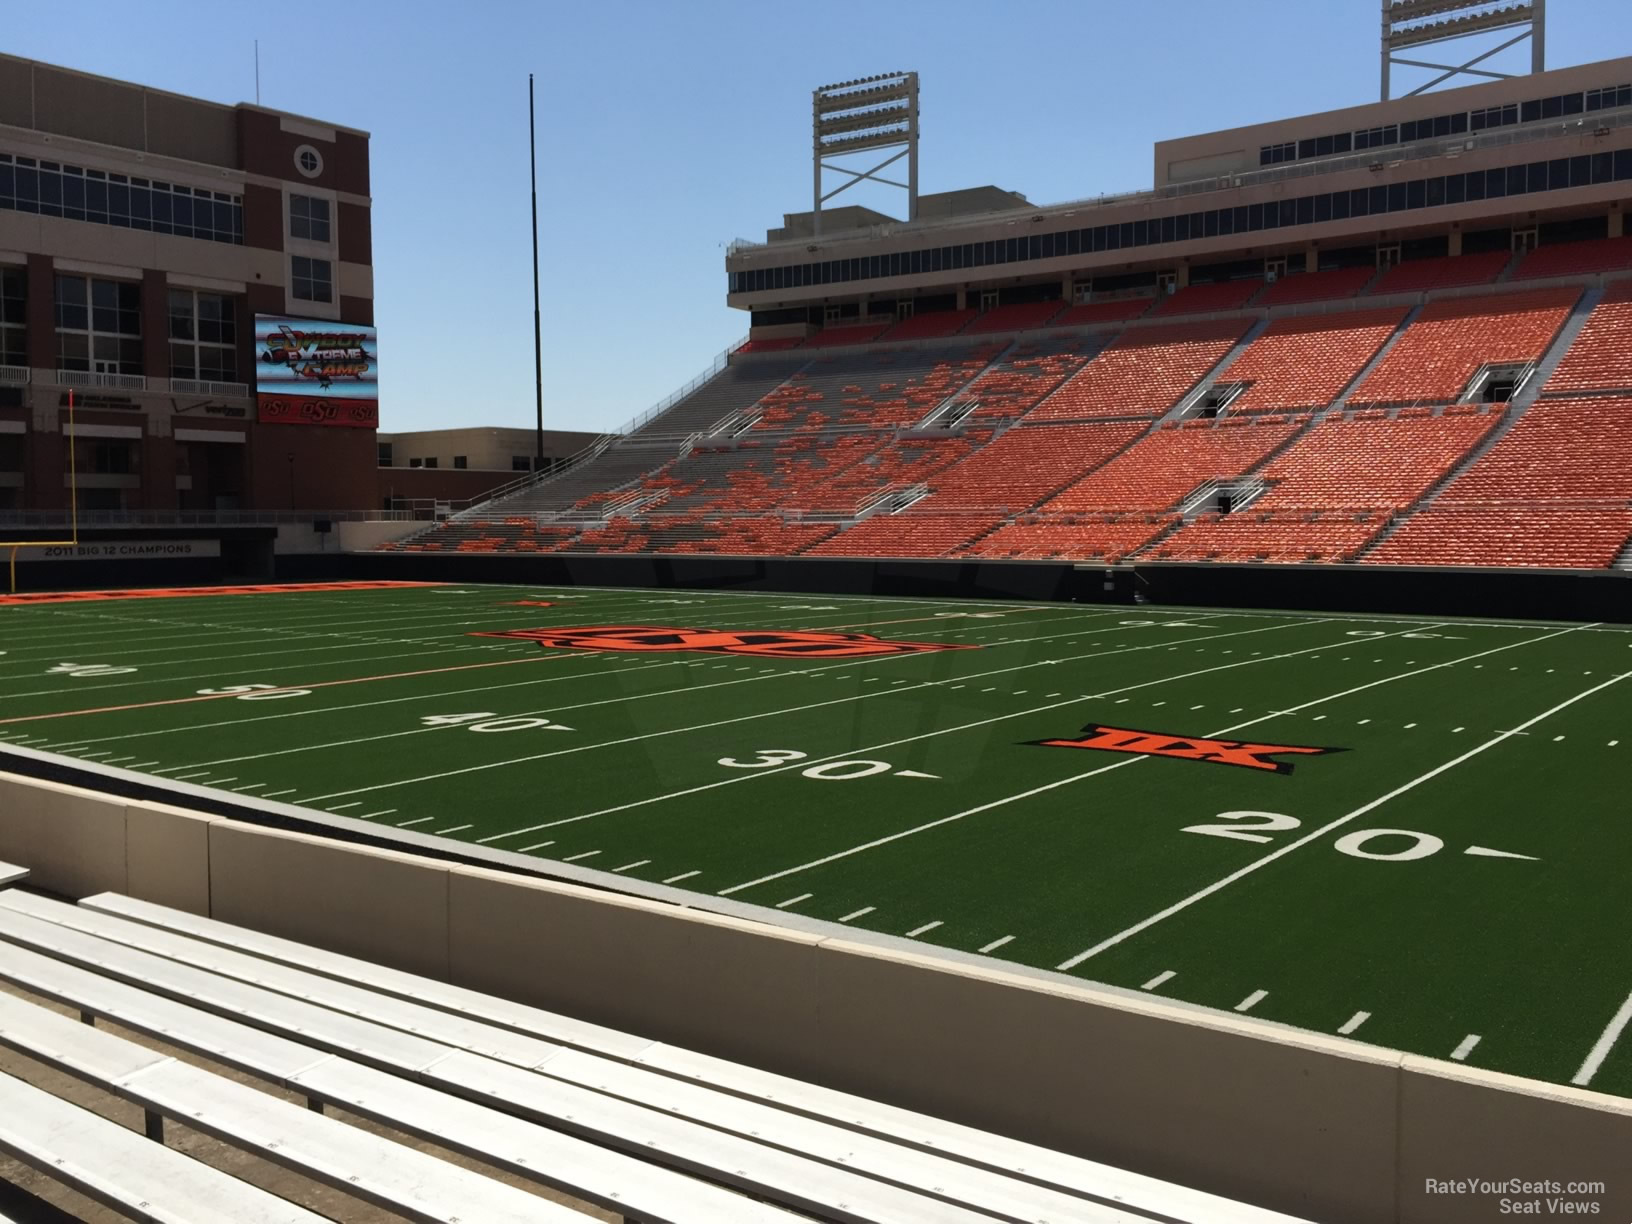 section 116, row 10 seat view  - boone pickens stadium